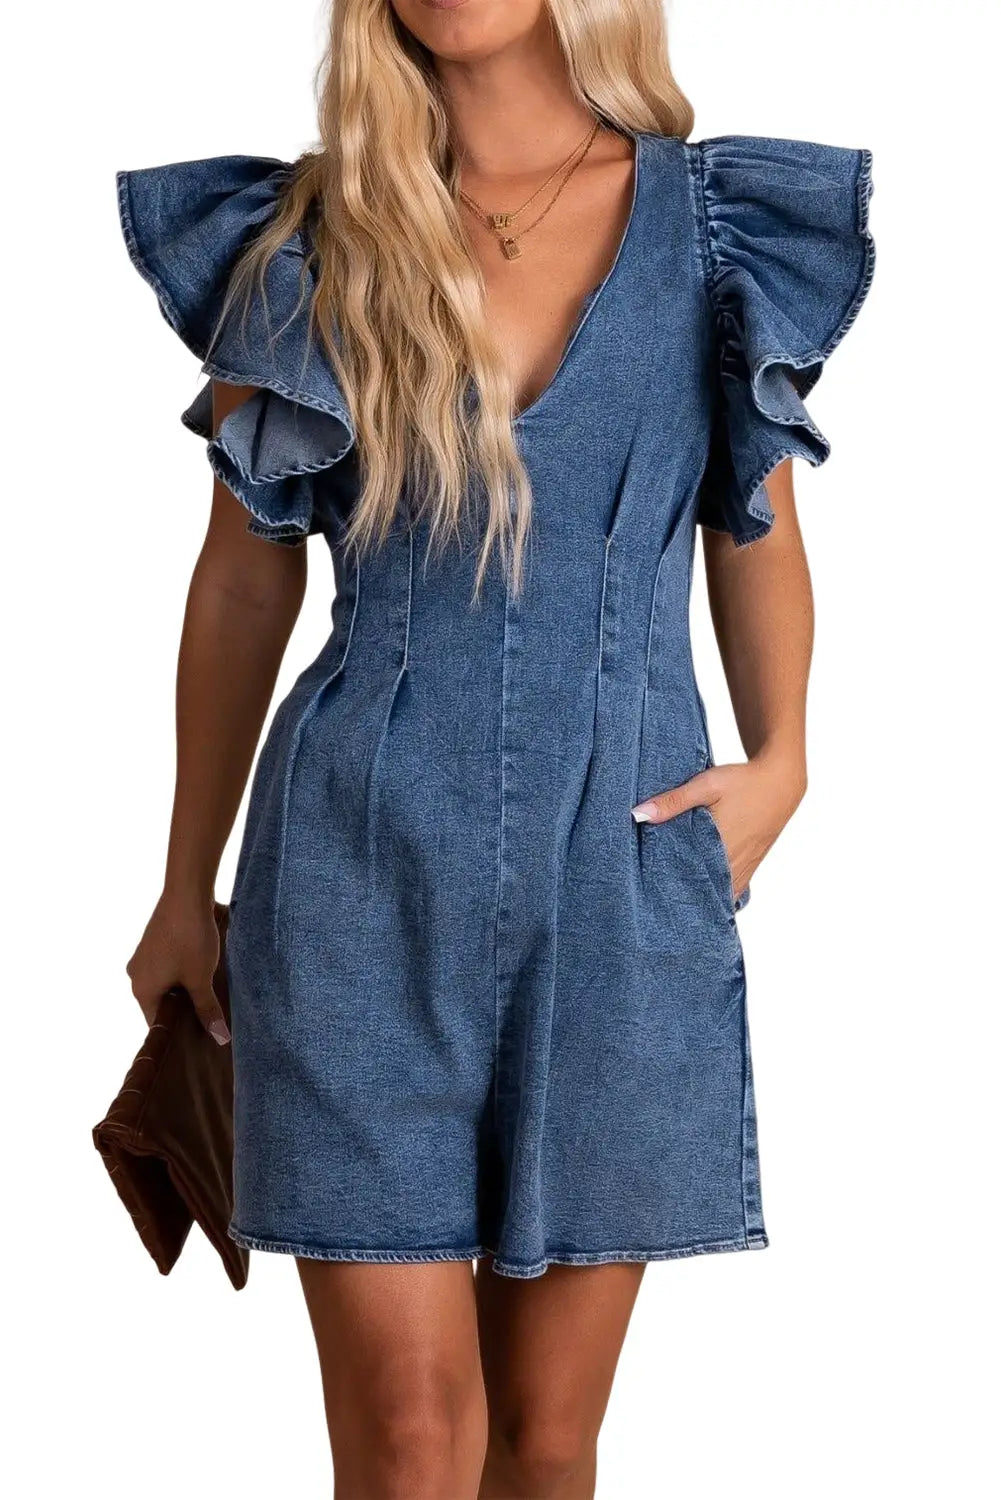 Blue ruffle pleated denim romper with pockets - jumpsuits & rompers